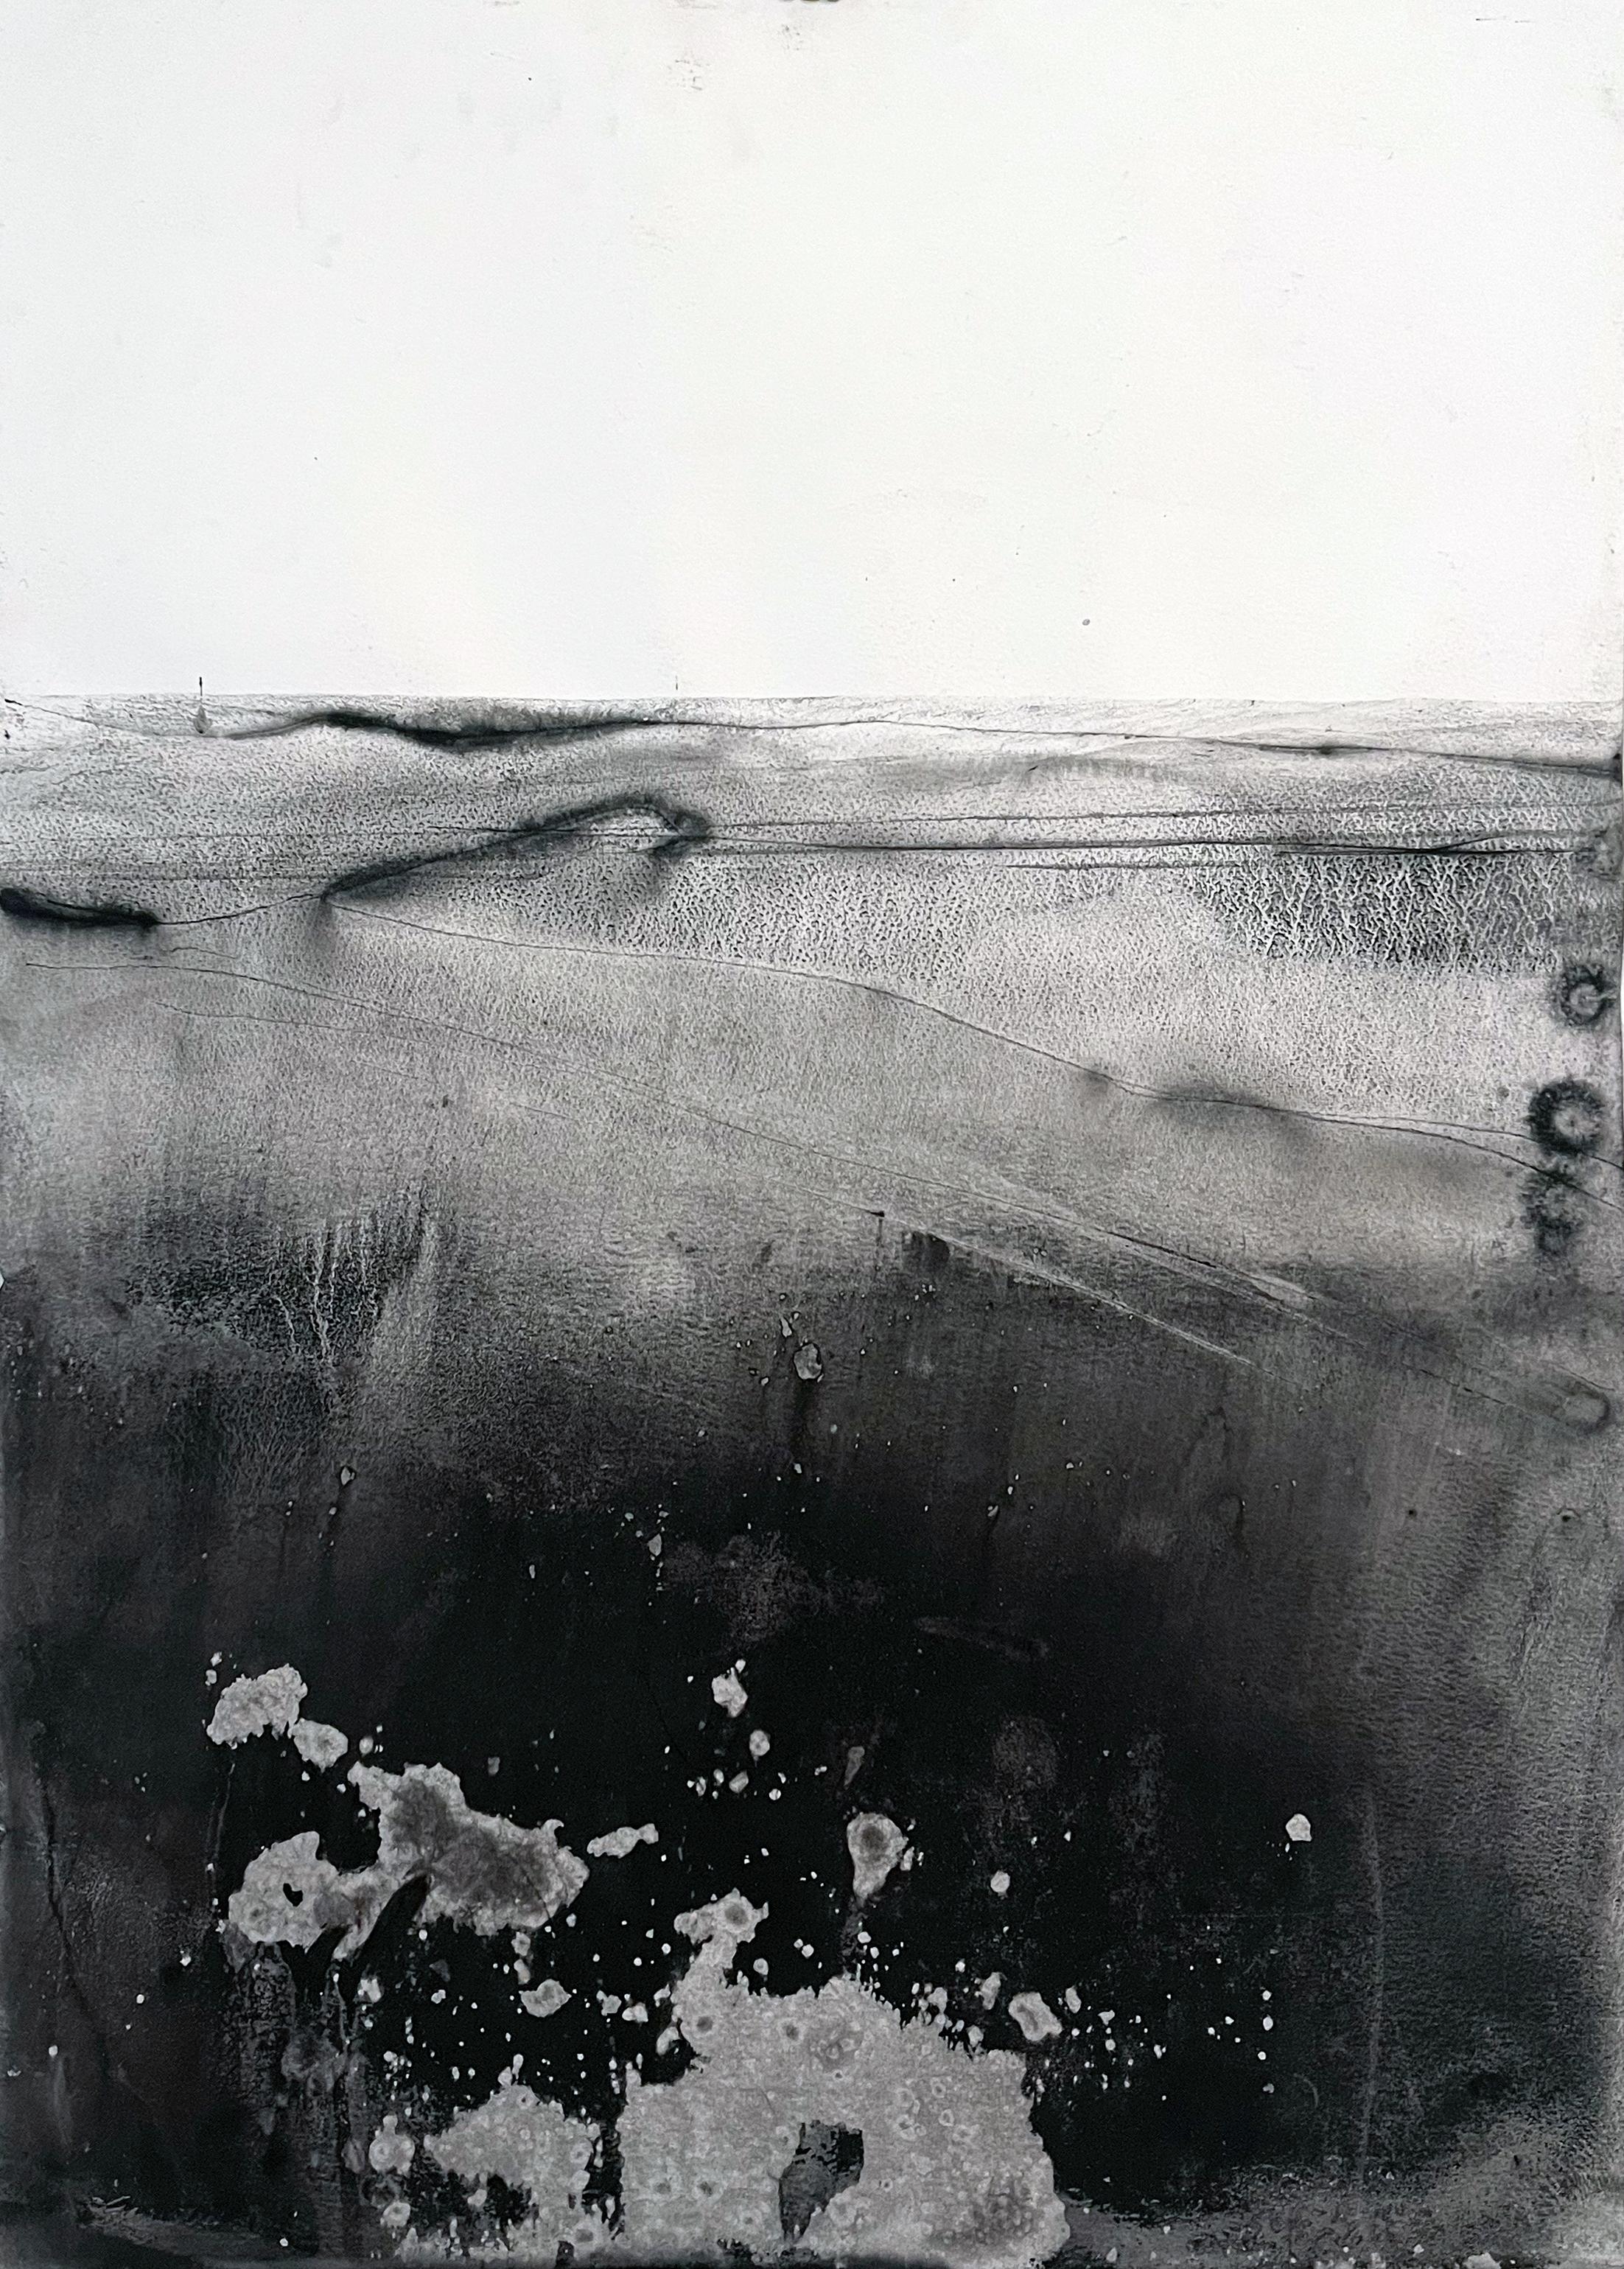 Marilina Marchica Landscape Painting - "Landscape B/W" Minimalist Paint on Paper  Large size Made in Italy